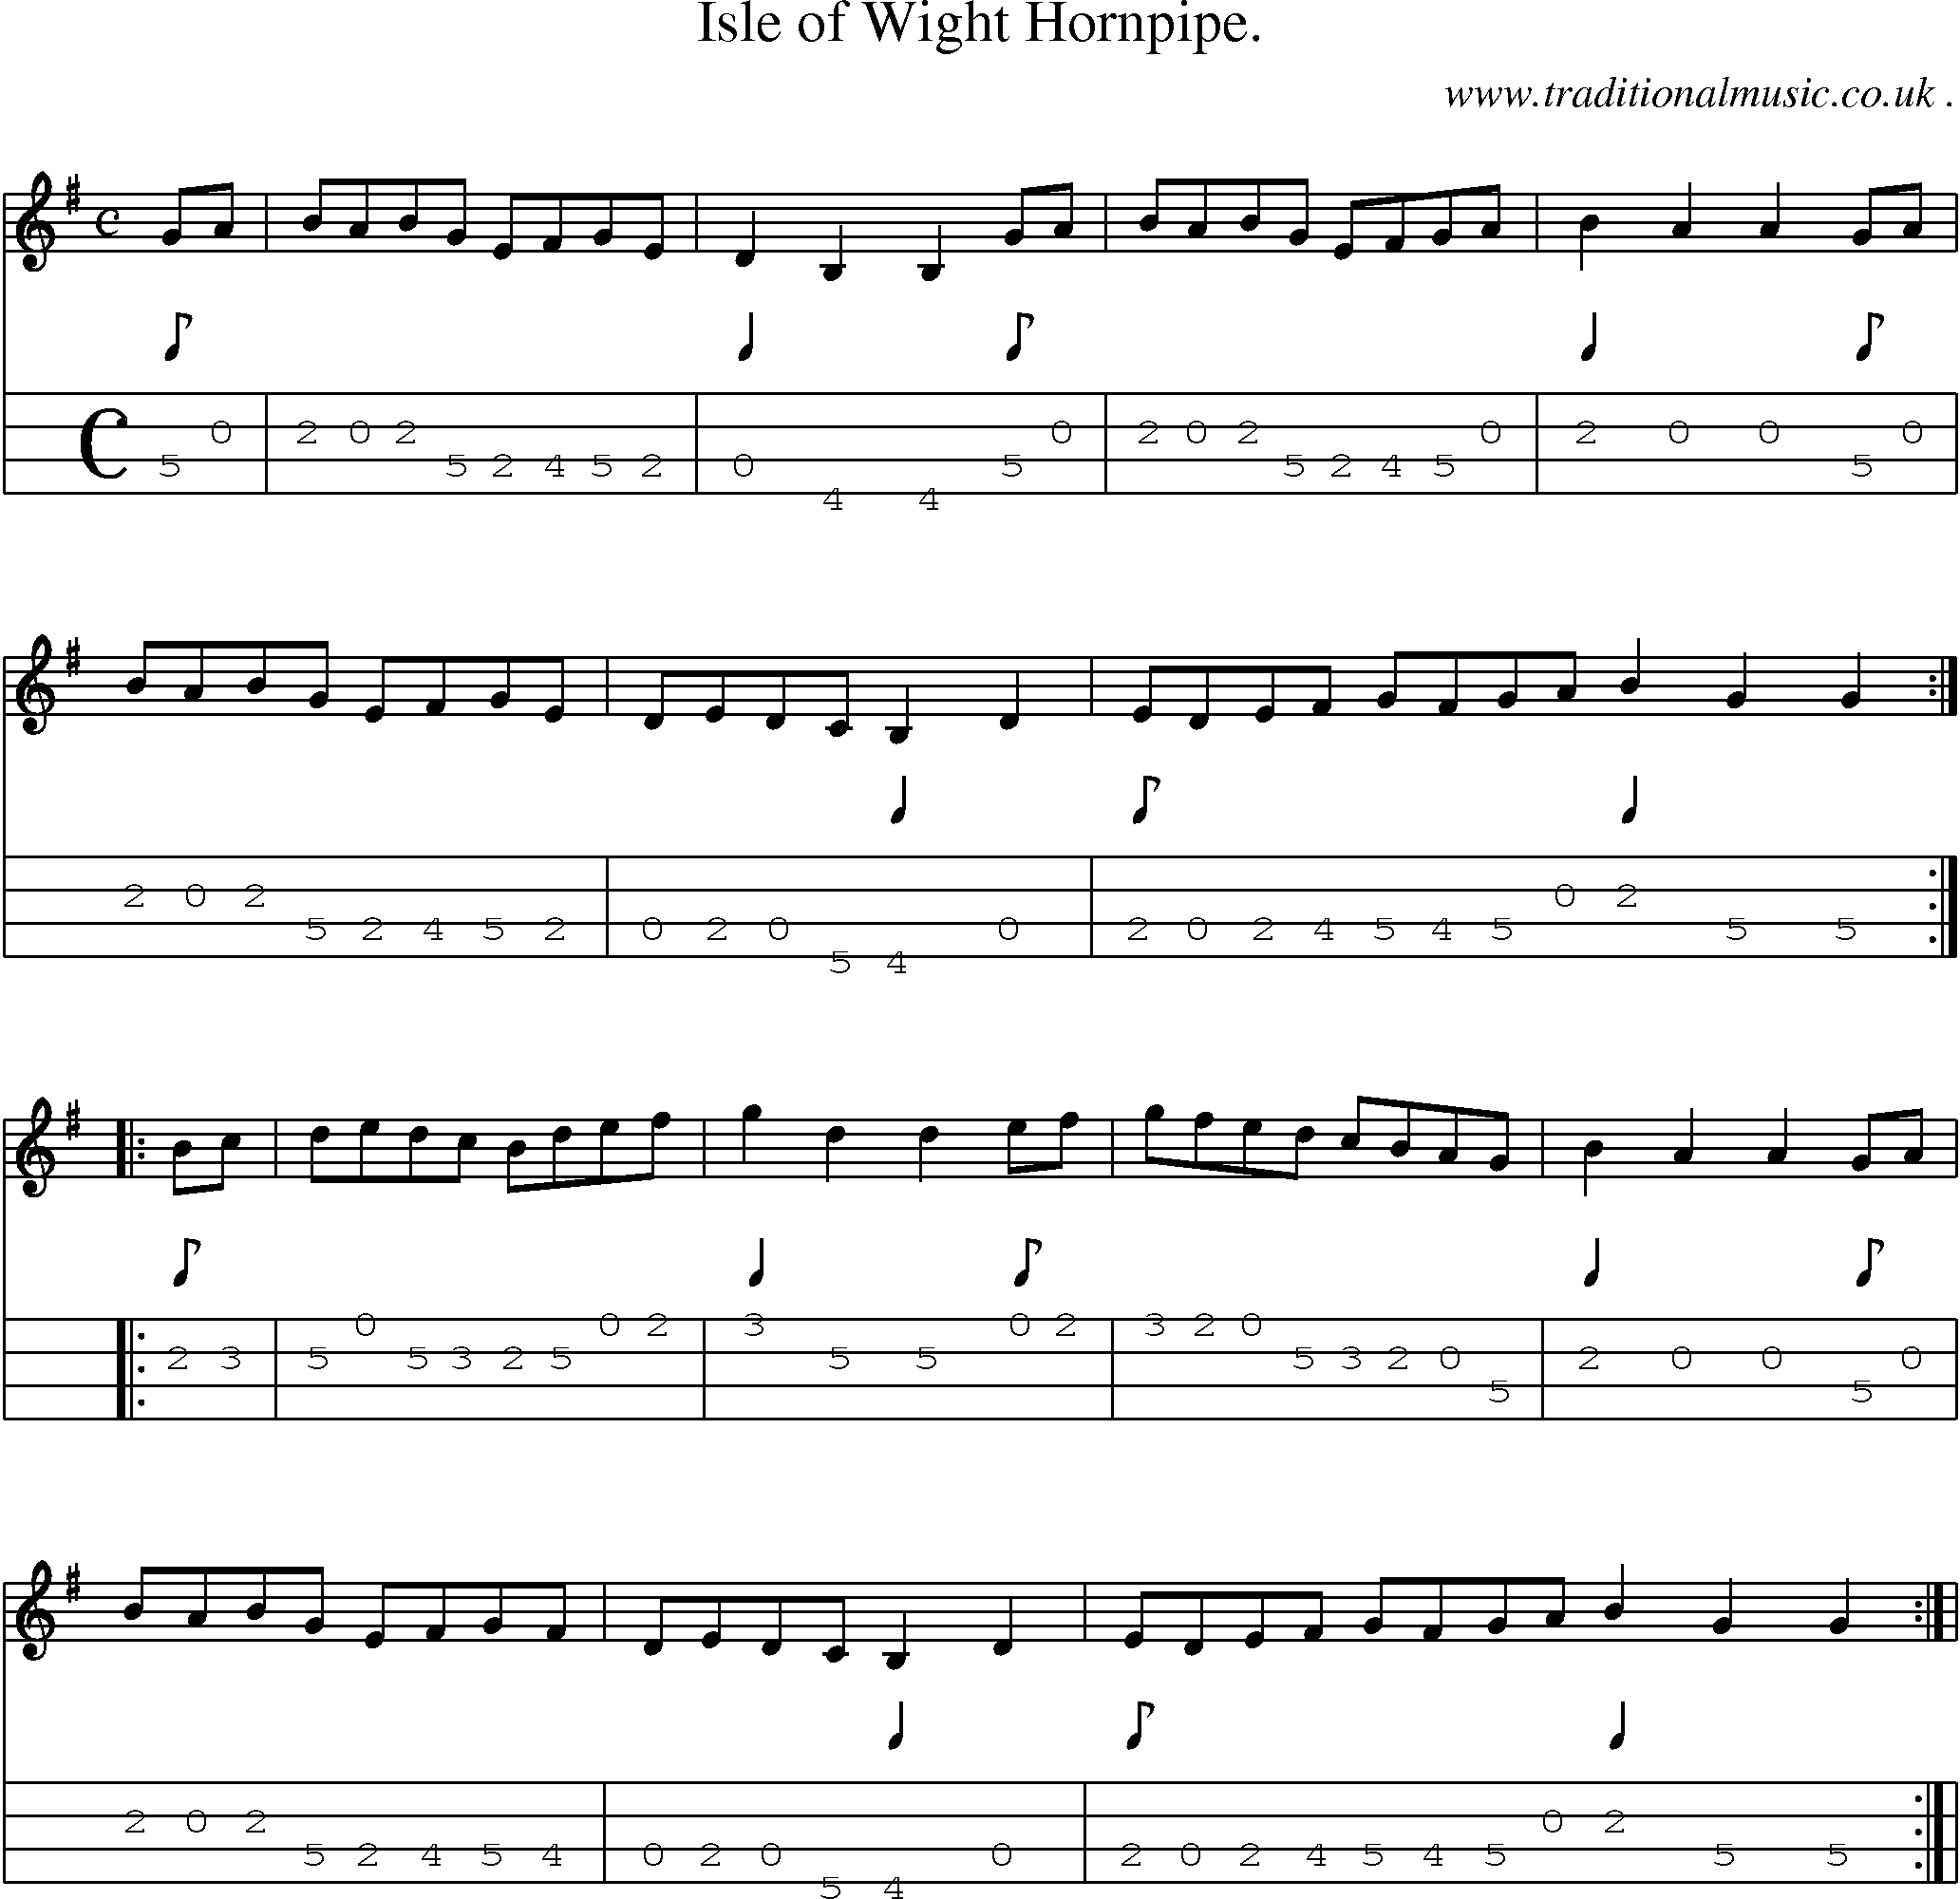 Sheet-Music and Mandolin Tabs for Isle Of Wight Hornpipe